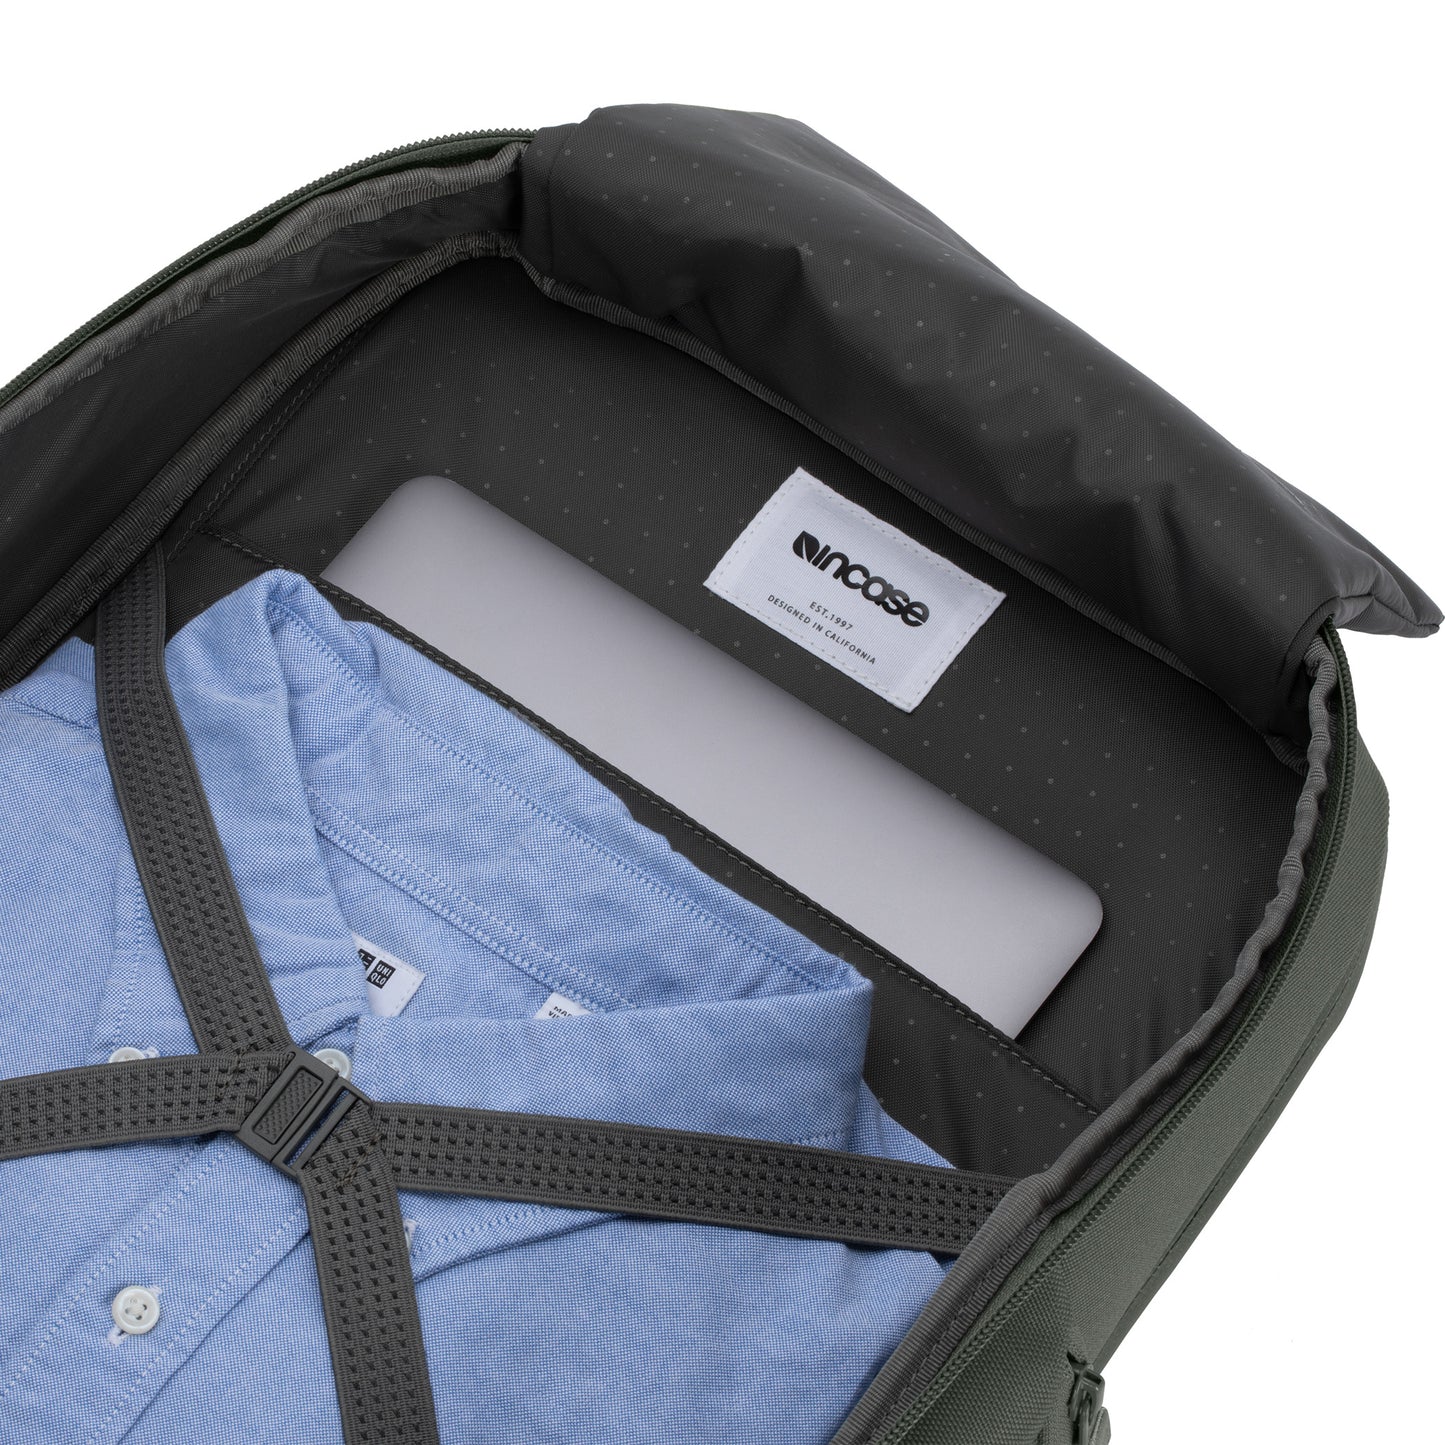 A.R.C. Commuter Pack -Grey-